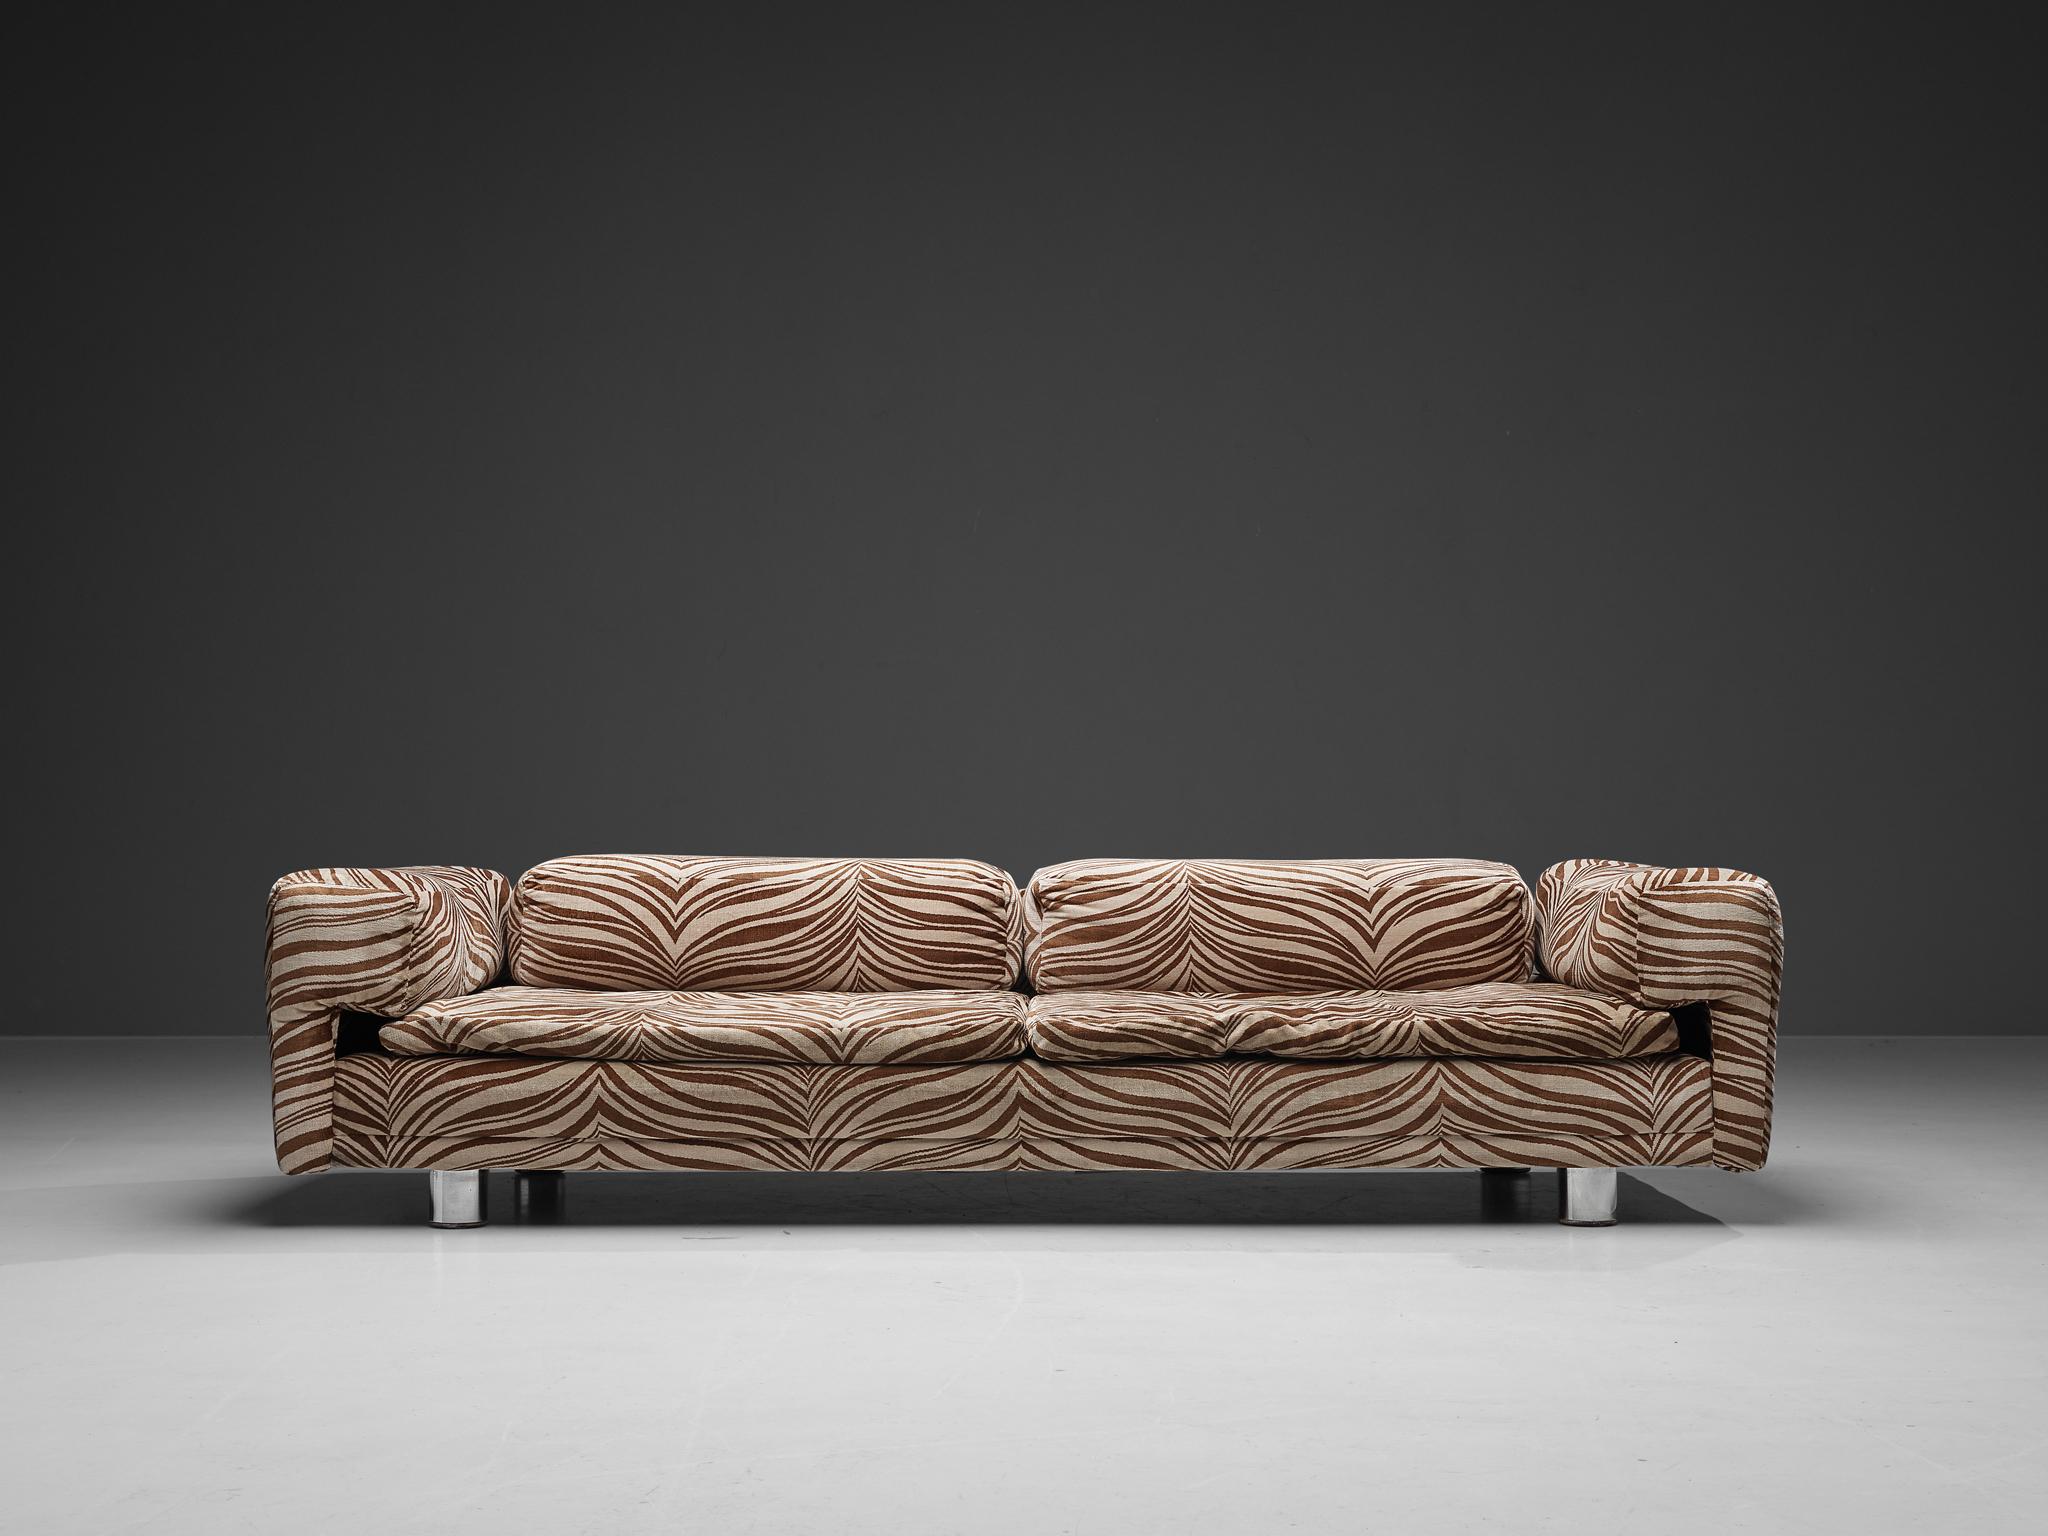 Howard Keith for HK Furniture, 'Diplomat' sofa, fabric, chrome-plated steel, United Kingdom, 1970s

This grand voluptuous ‘Diplomat’ sofa finds itself at the intersection of art and design. The exceptional and unique upholstery is executed in